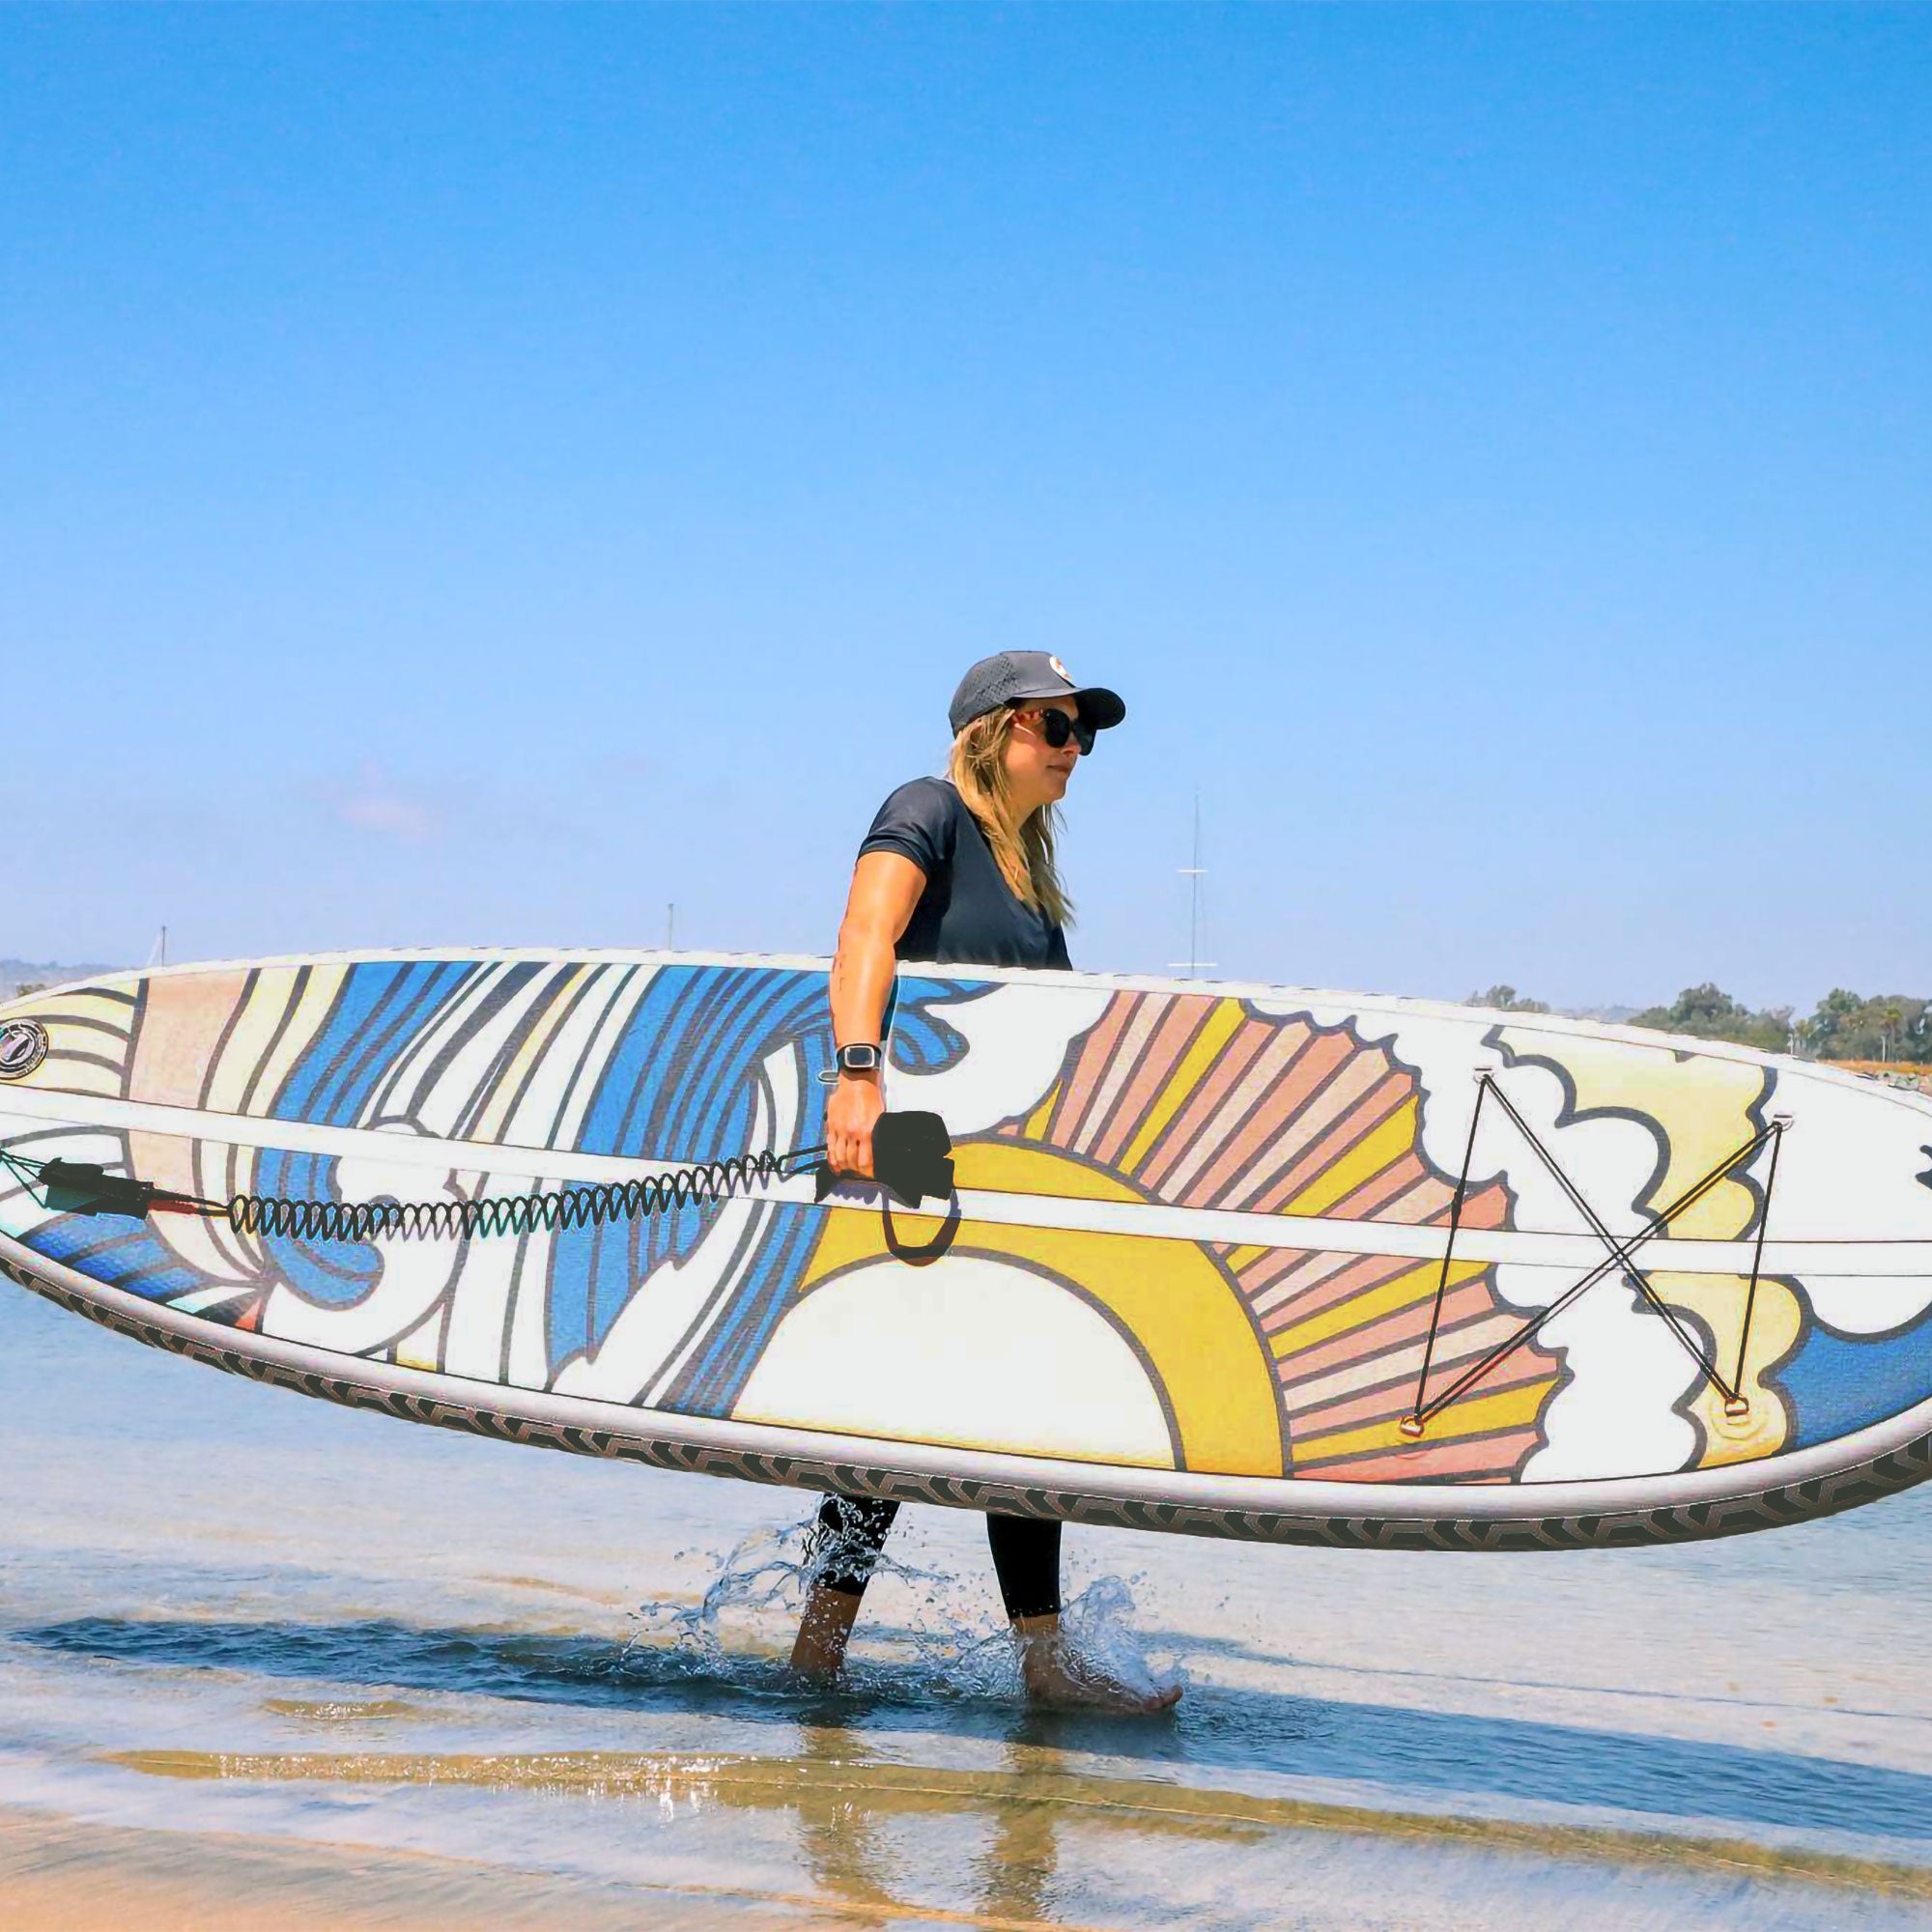 A woman carrying the stowaway art print paddleboard